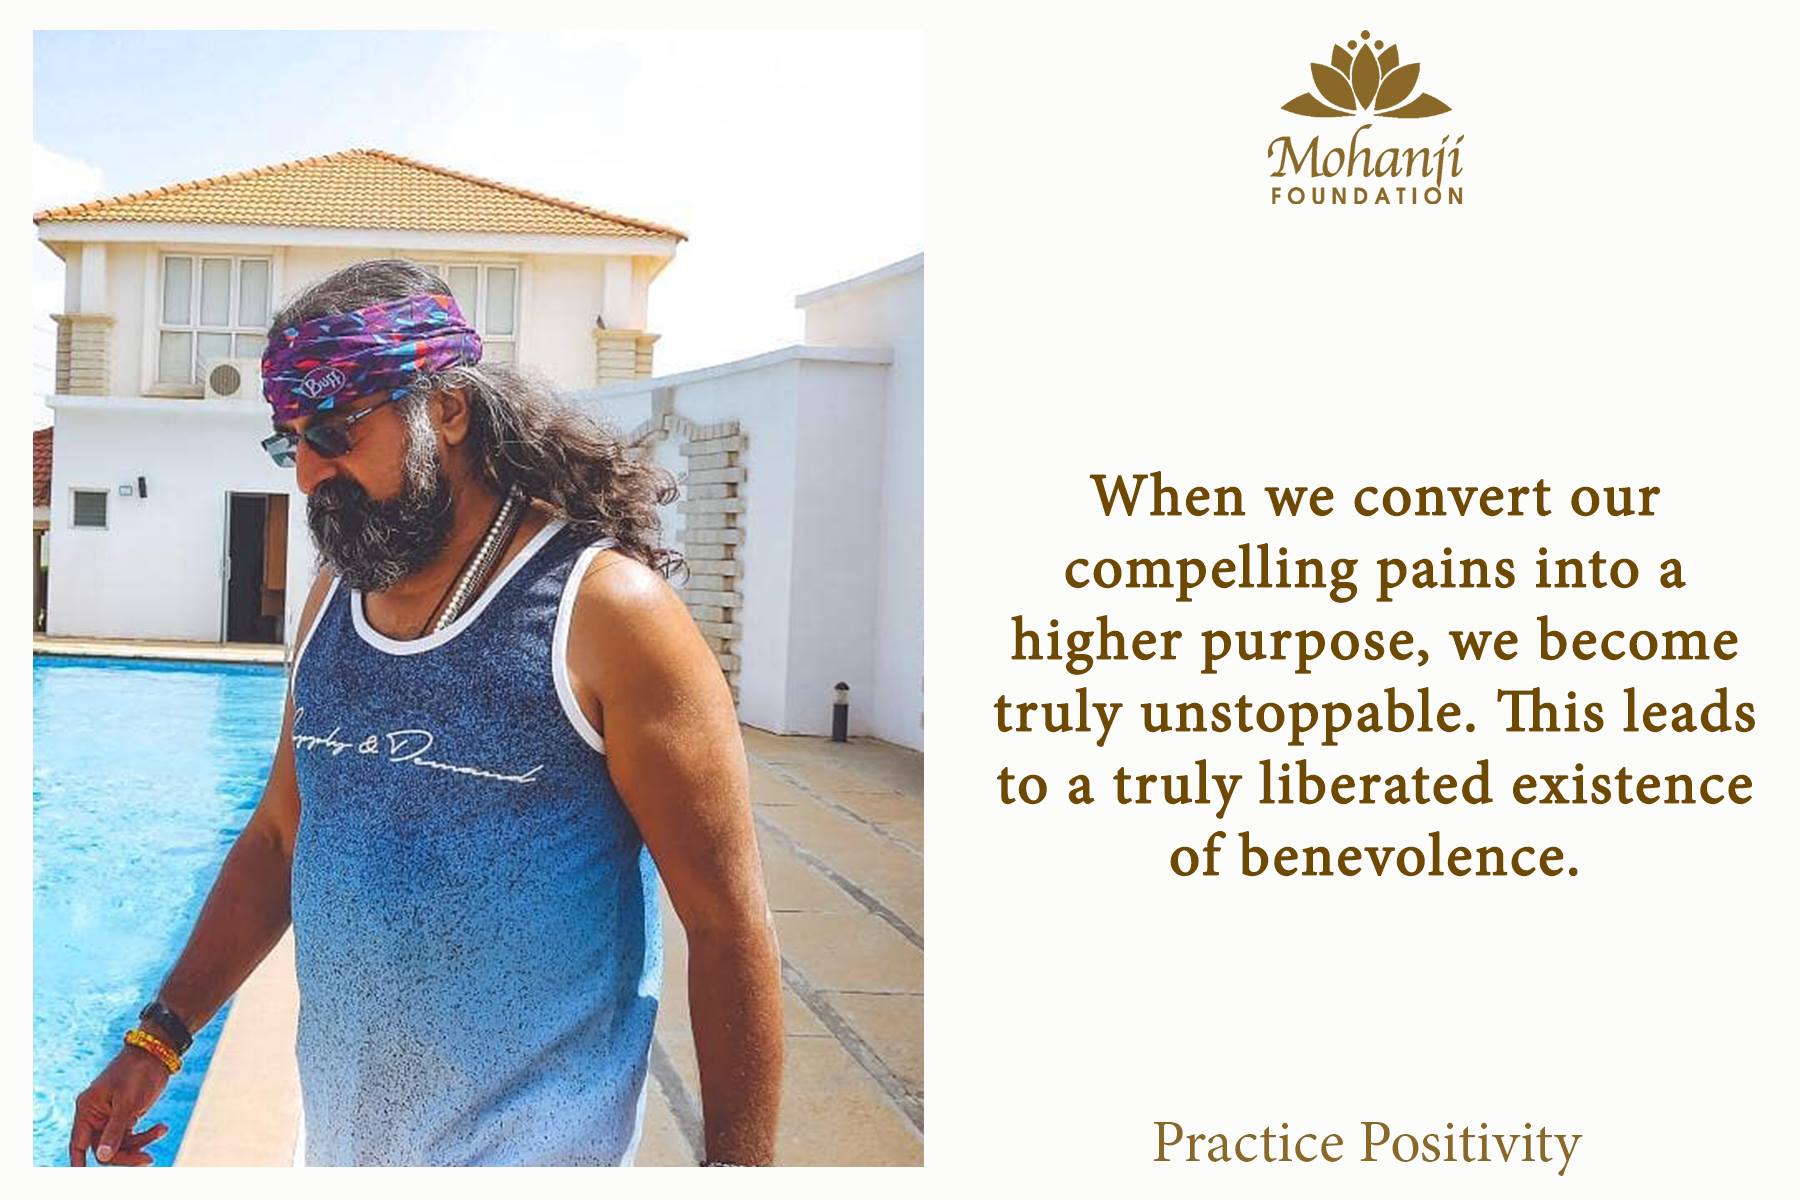 When we convert our compelling pains into a higher purpose, we become truly unstoppable. This leads to a truly liberated existence of benevolence. - Mohanji